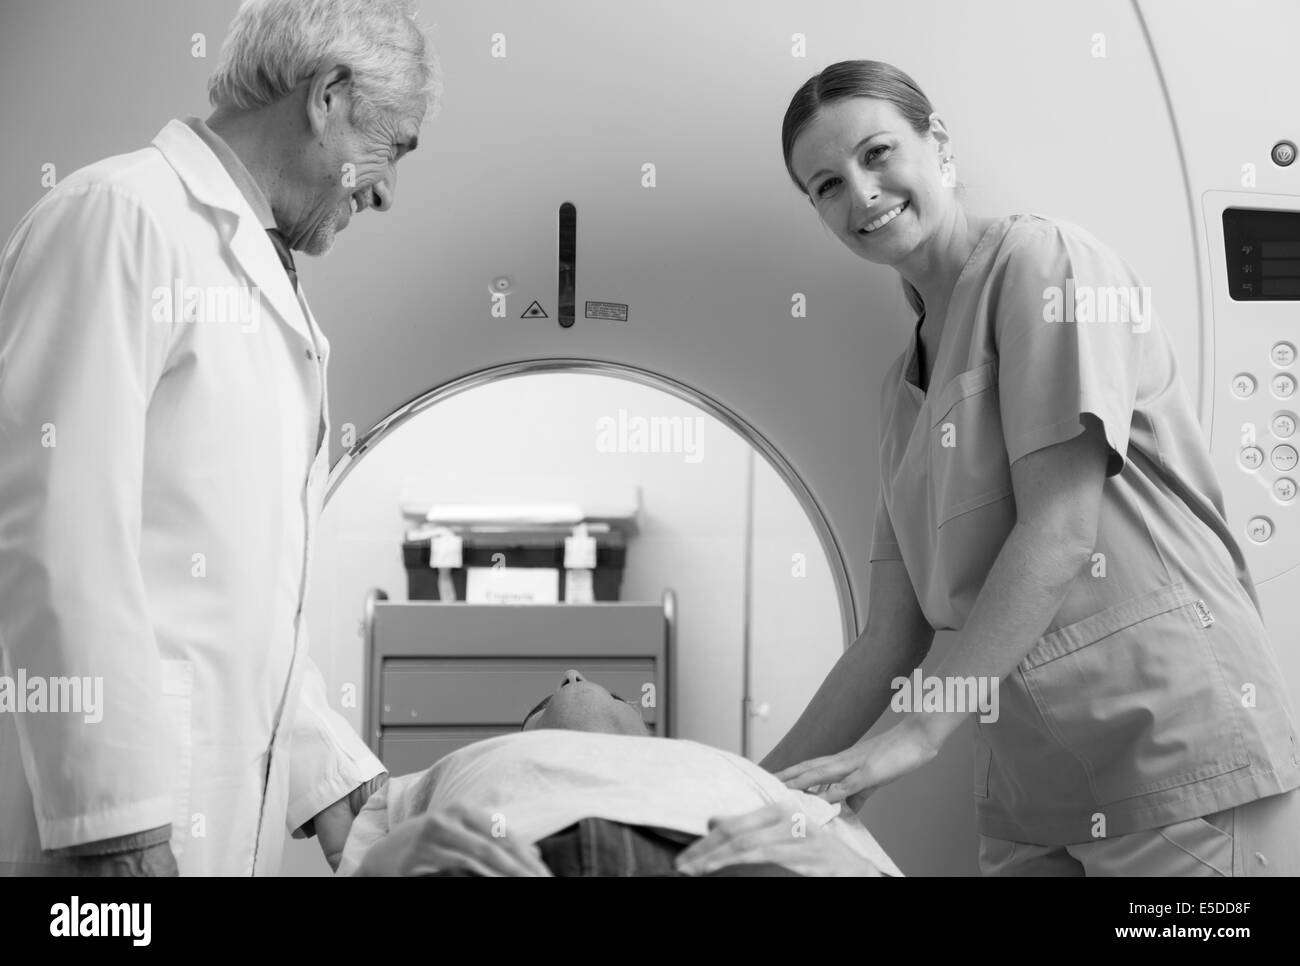 Man in 40s undergoing MRI open scan, male and female doctor smiling at him. Stock Photo